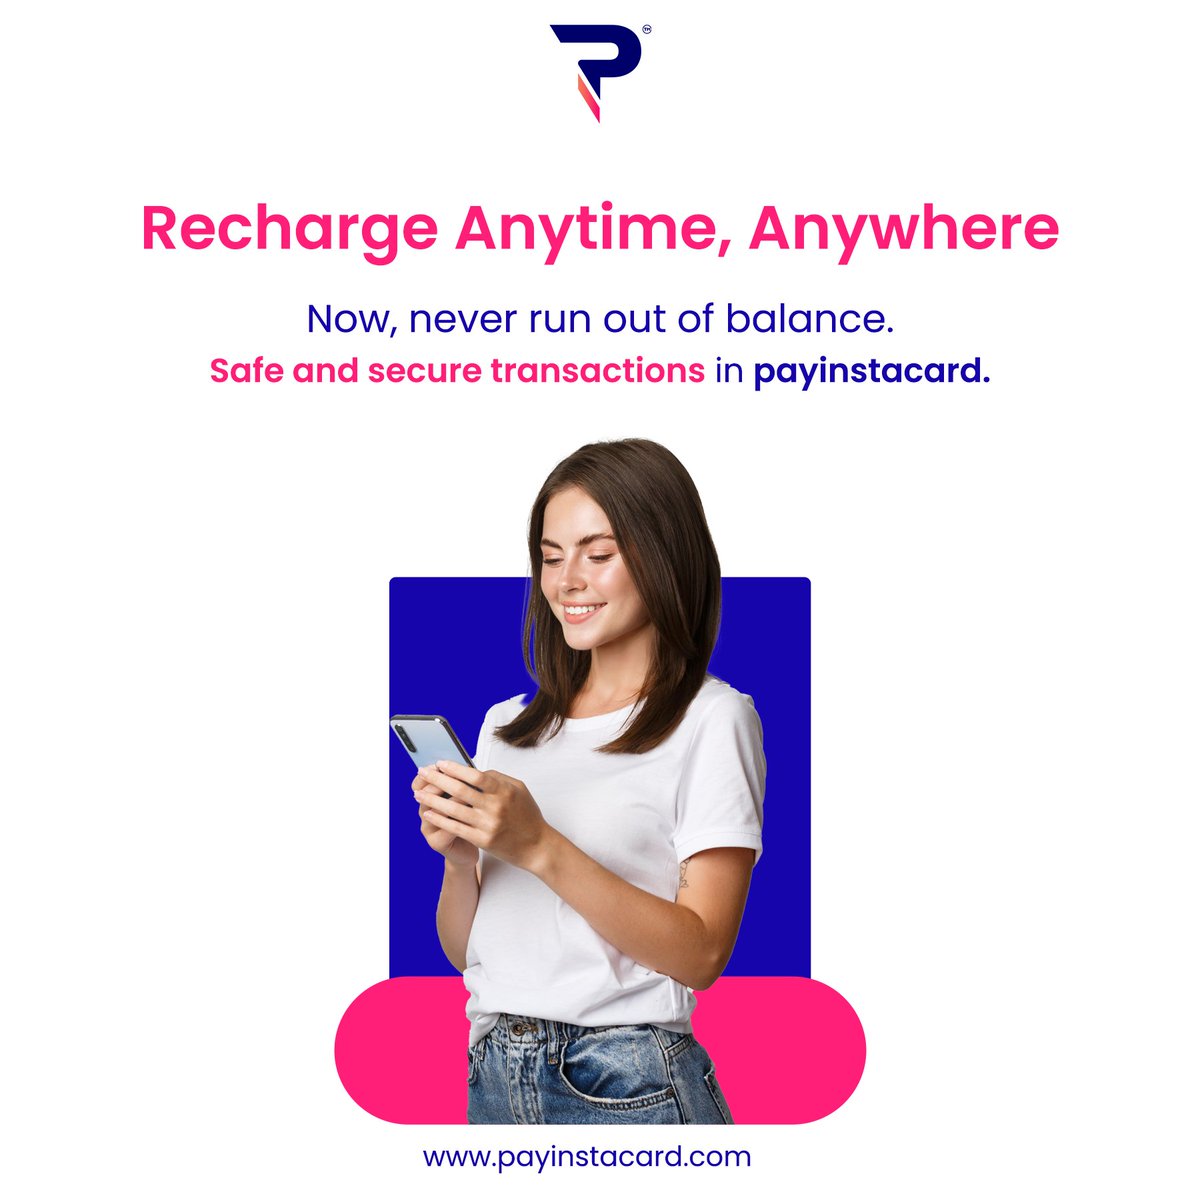 Recharge anytime, anywhere. Now, never run out of balance. Safe and secure transactions in payinstacard.
.
.
.
#RechargeAnywhere #NeverRunOutOfBalance #SecureTransactions #Payinstacard #TopUpWithEase #NoMoreBalanceWorries #SafeAndEasy #ConvenientRecharge #payinstacard